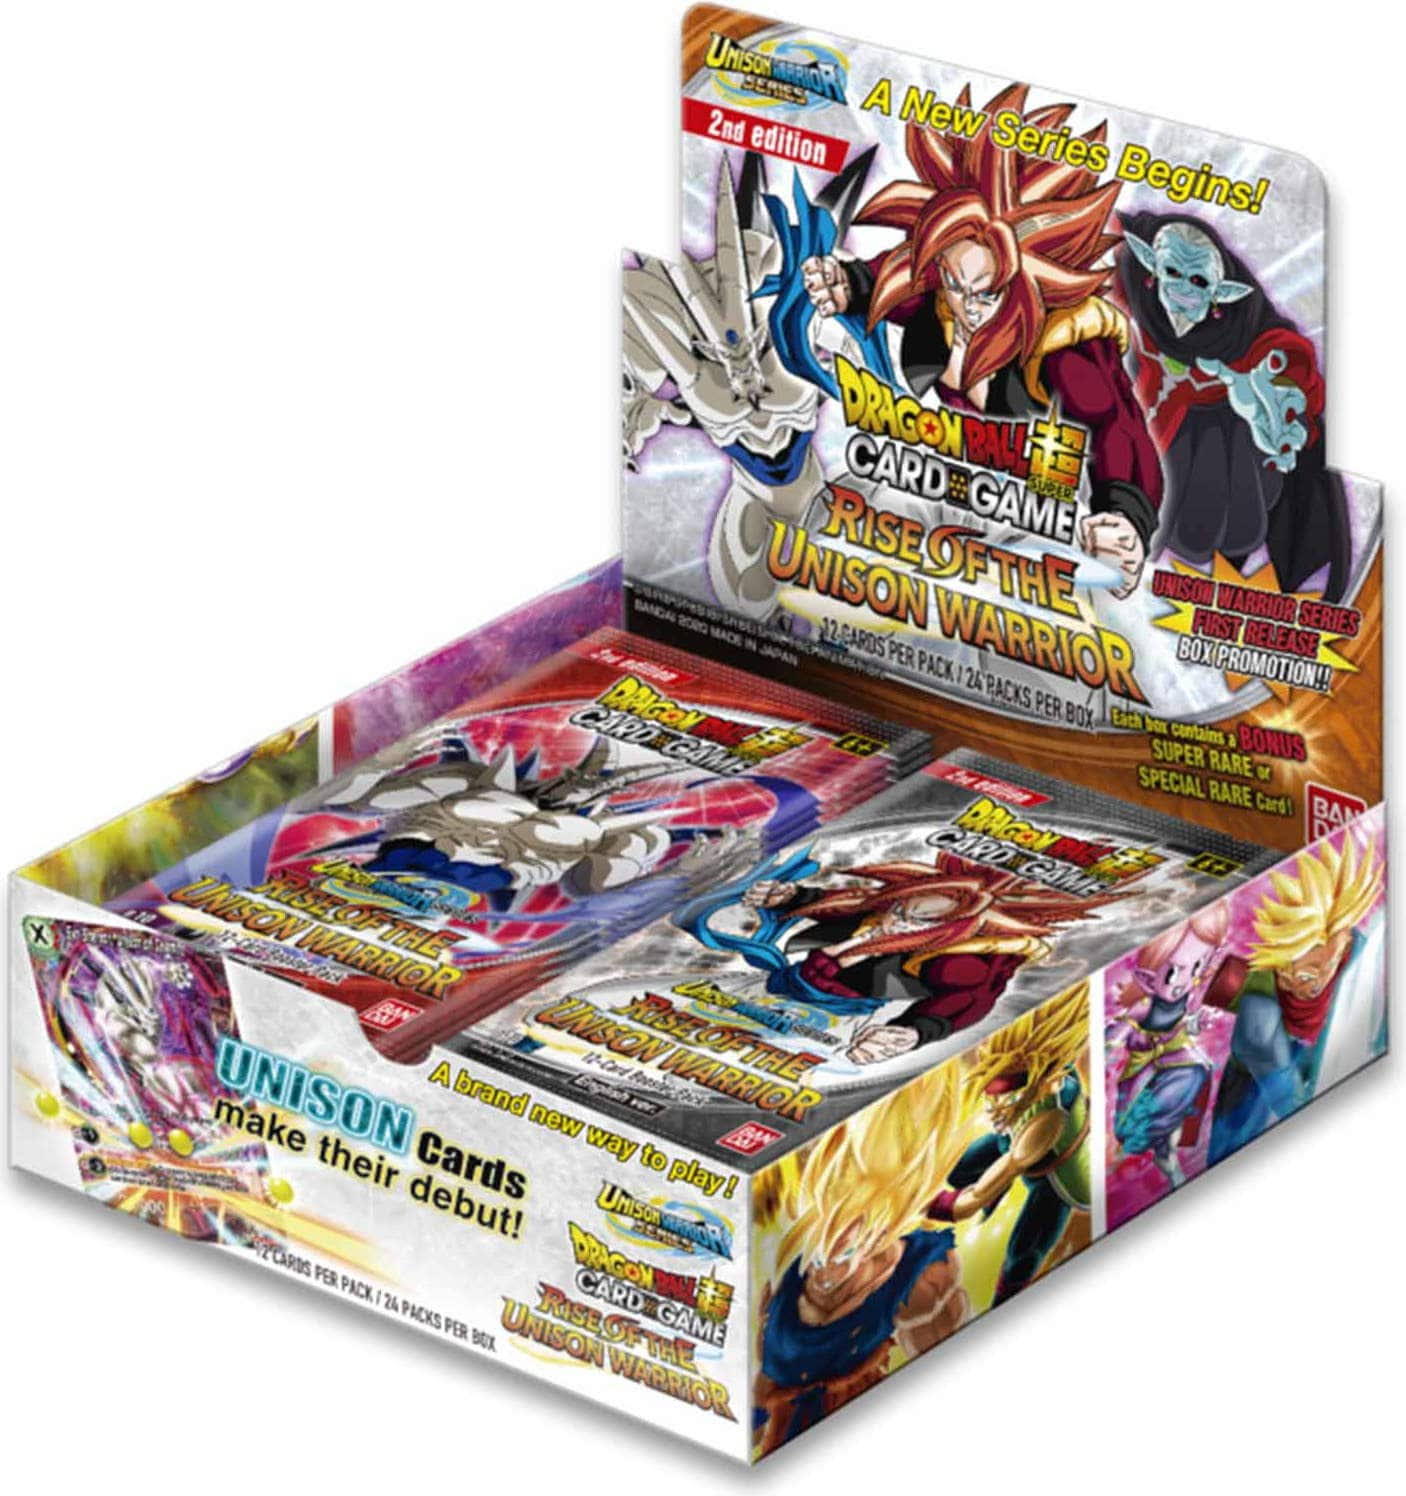 Dragon Ball Super - Rise of the Unison Warrior - 2nd Edition Booster Box